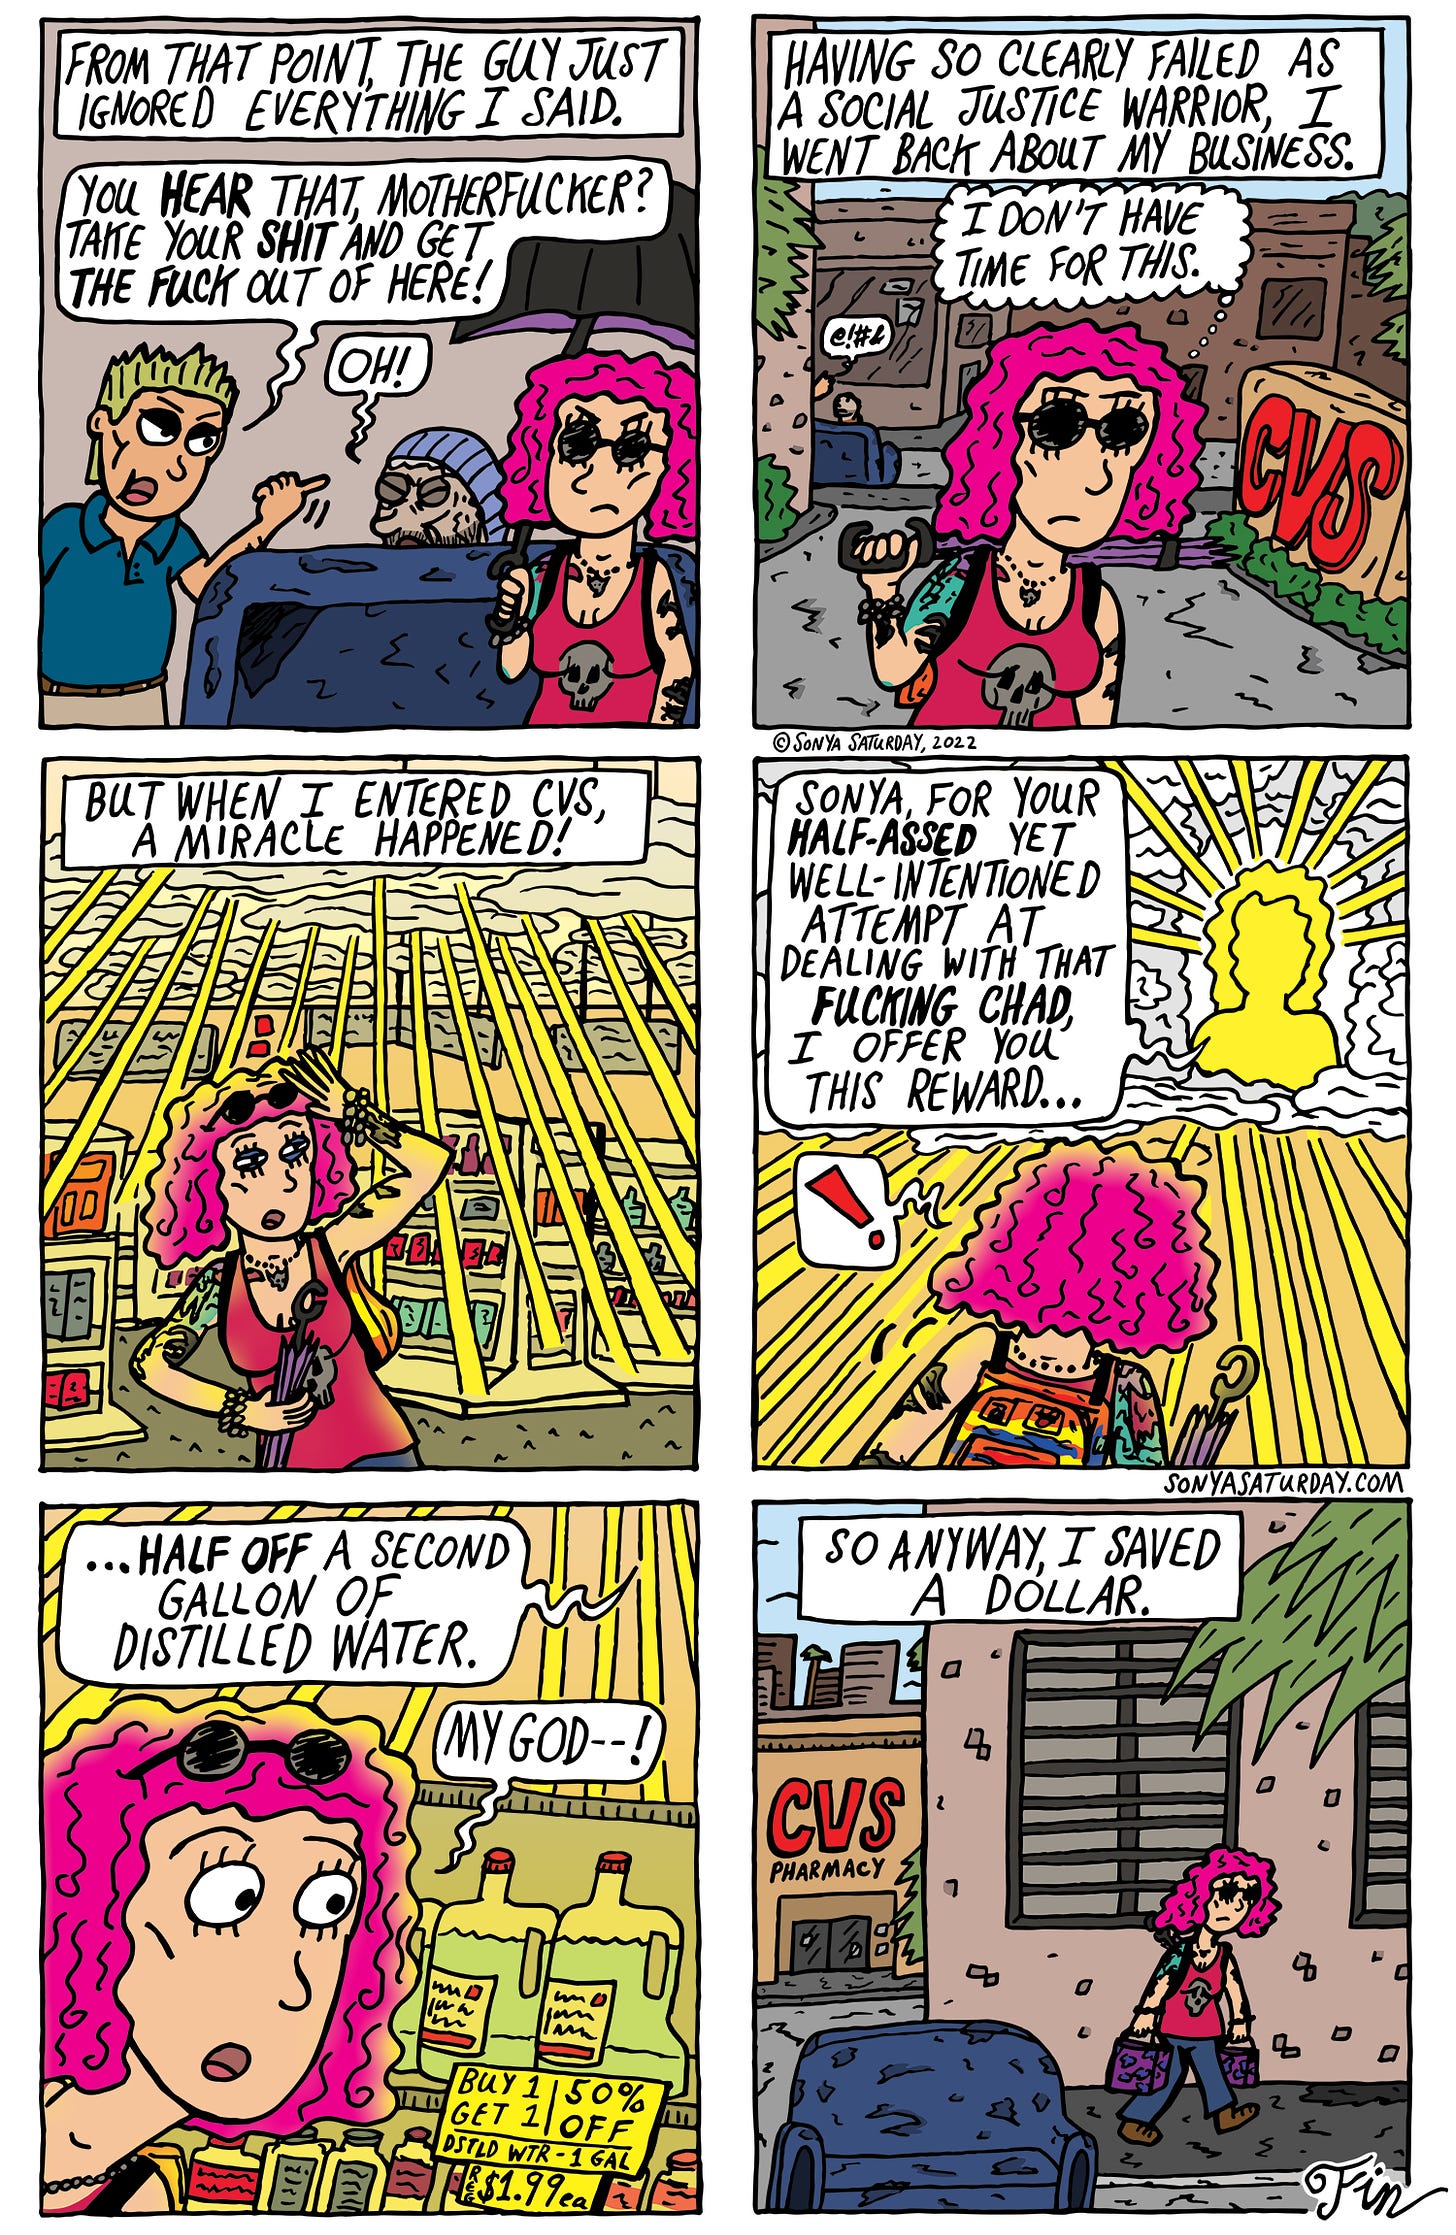 Comic strip in which Sonya Saturday is rewarded for her social justice warrior efforts